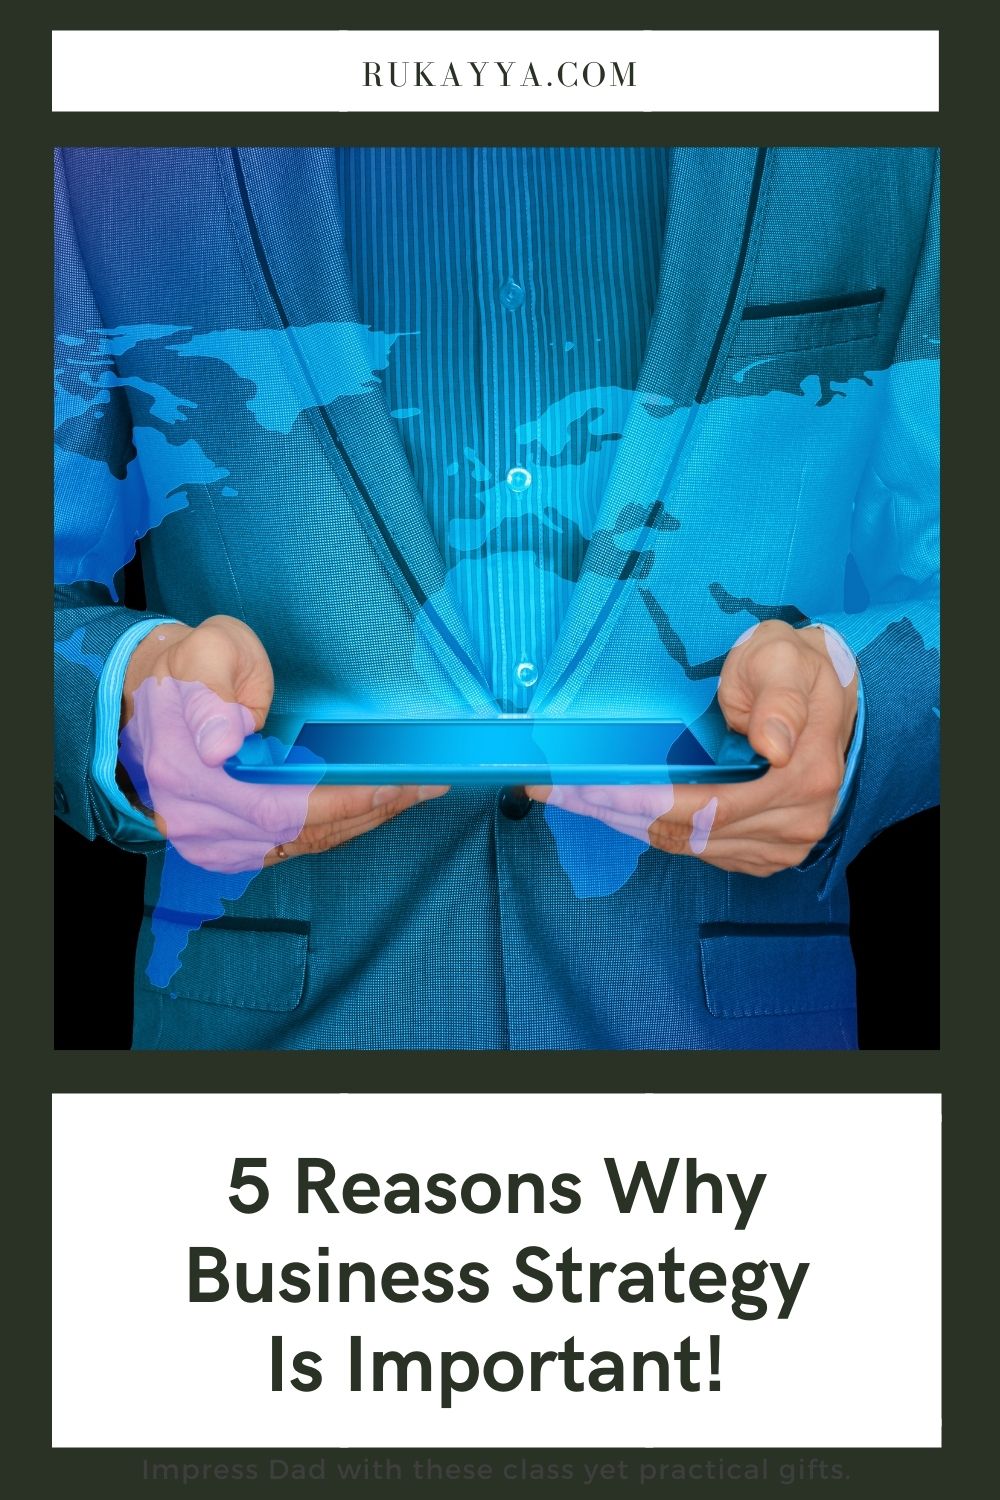 Why Business Strategy Is Important? Top 5 Reasons!